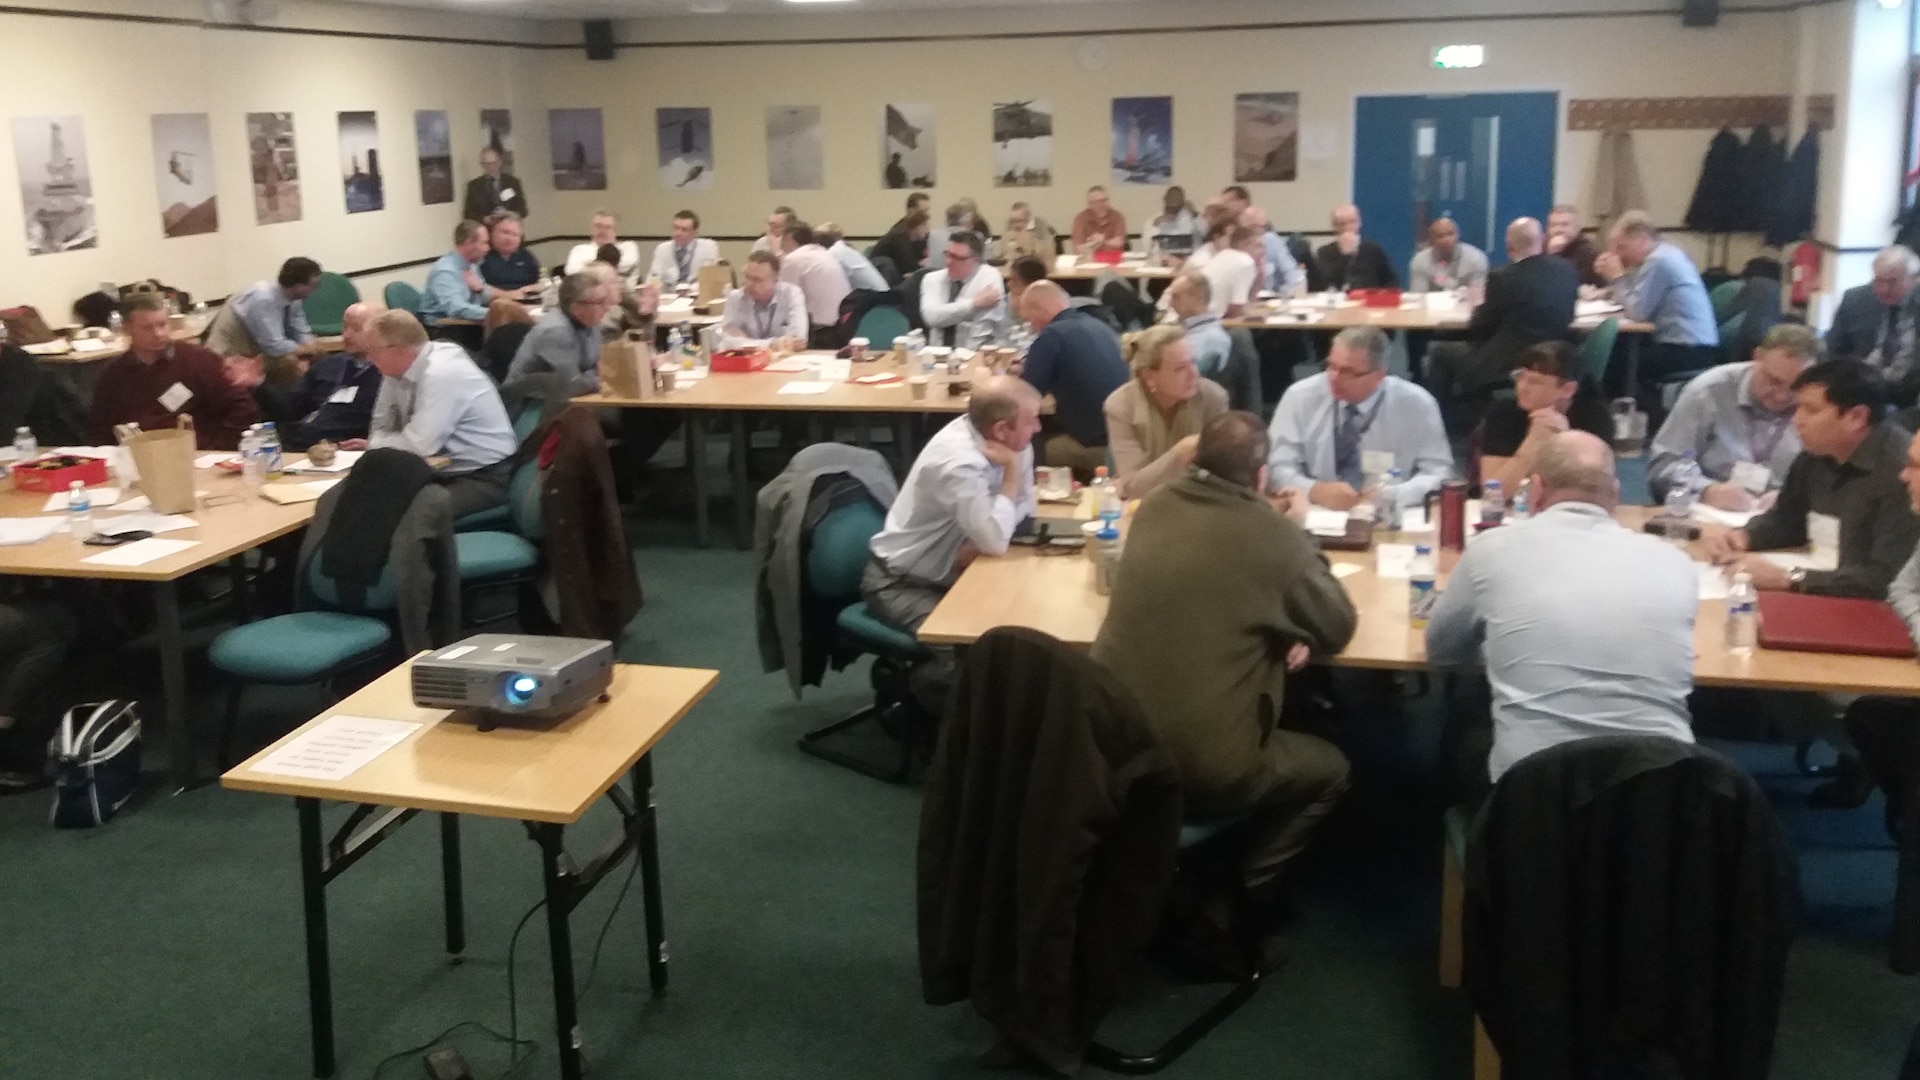 Quality assurance members from DCMA United Kingdom and others collaborate during a partner nation event.